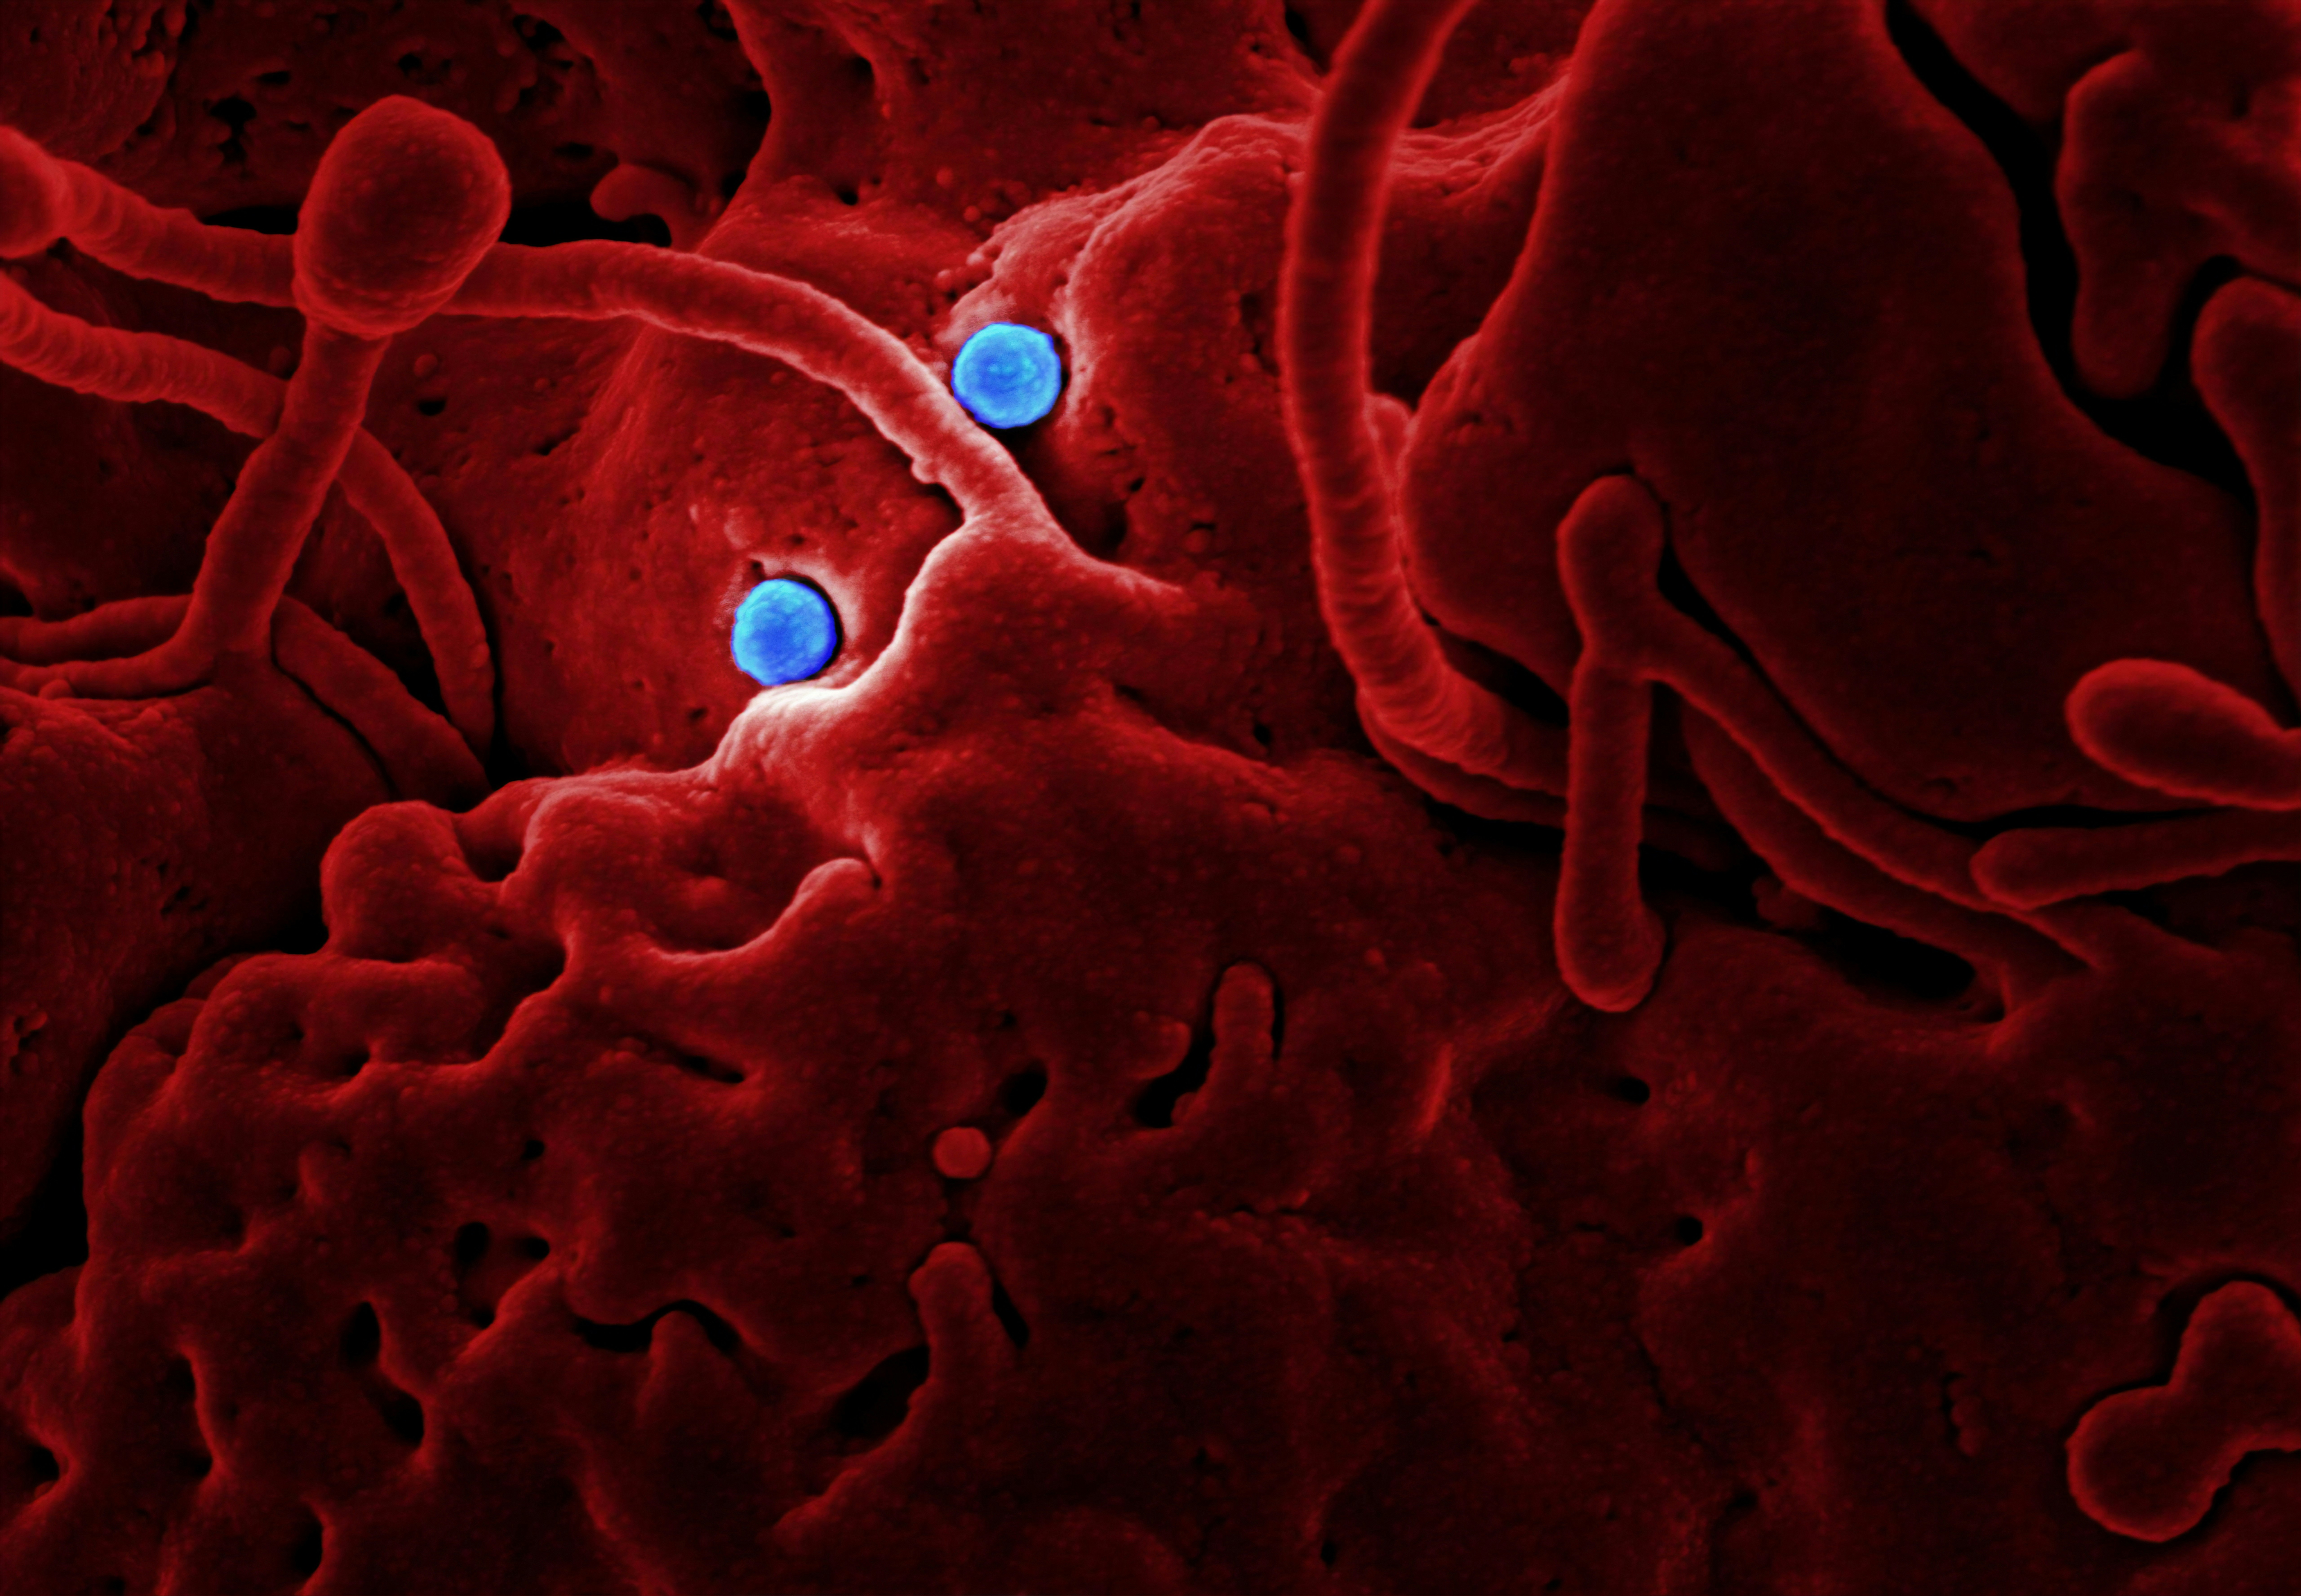 Produced by the National Institute of Allergy and Infectious Diseases (NIAID), in collaboration with Colorado State University, this highly magnified, digitally colorized scanning electron microscopic (SEM) image, reveals ultrastructural details at the site of interaction of two spherical shaped, Middle East respiratory syndrome coronavirus (MERS-CoV) viral particles, colorized blue, that were on the surface of a camel epithelial cell, colorized red.